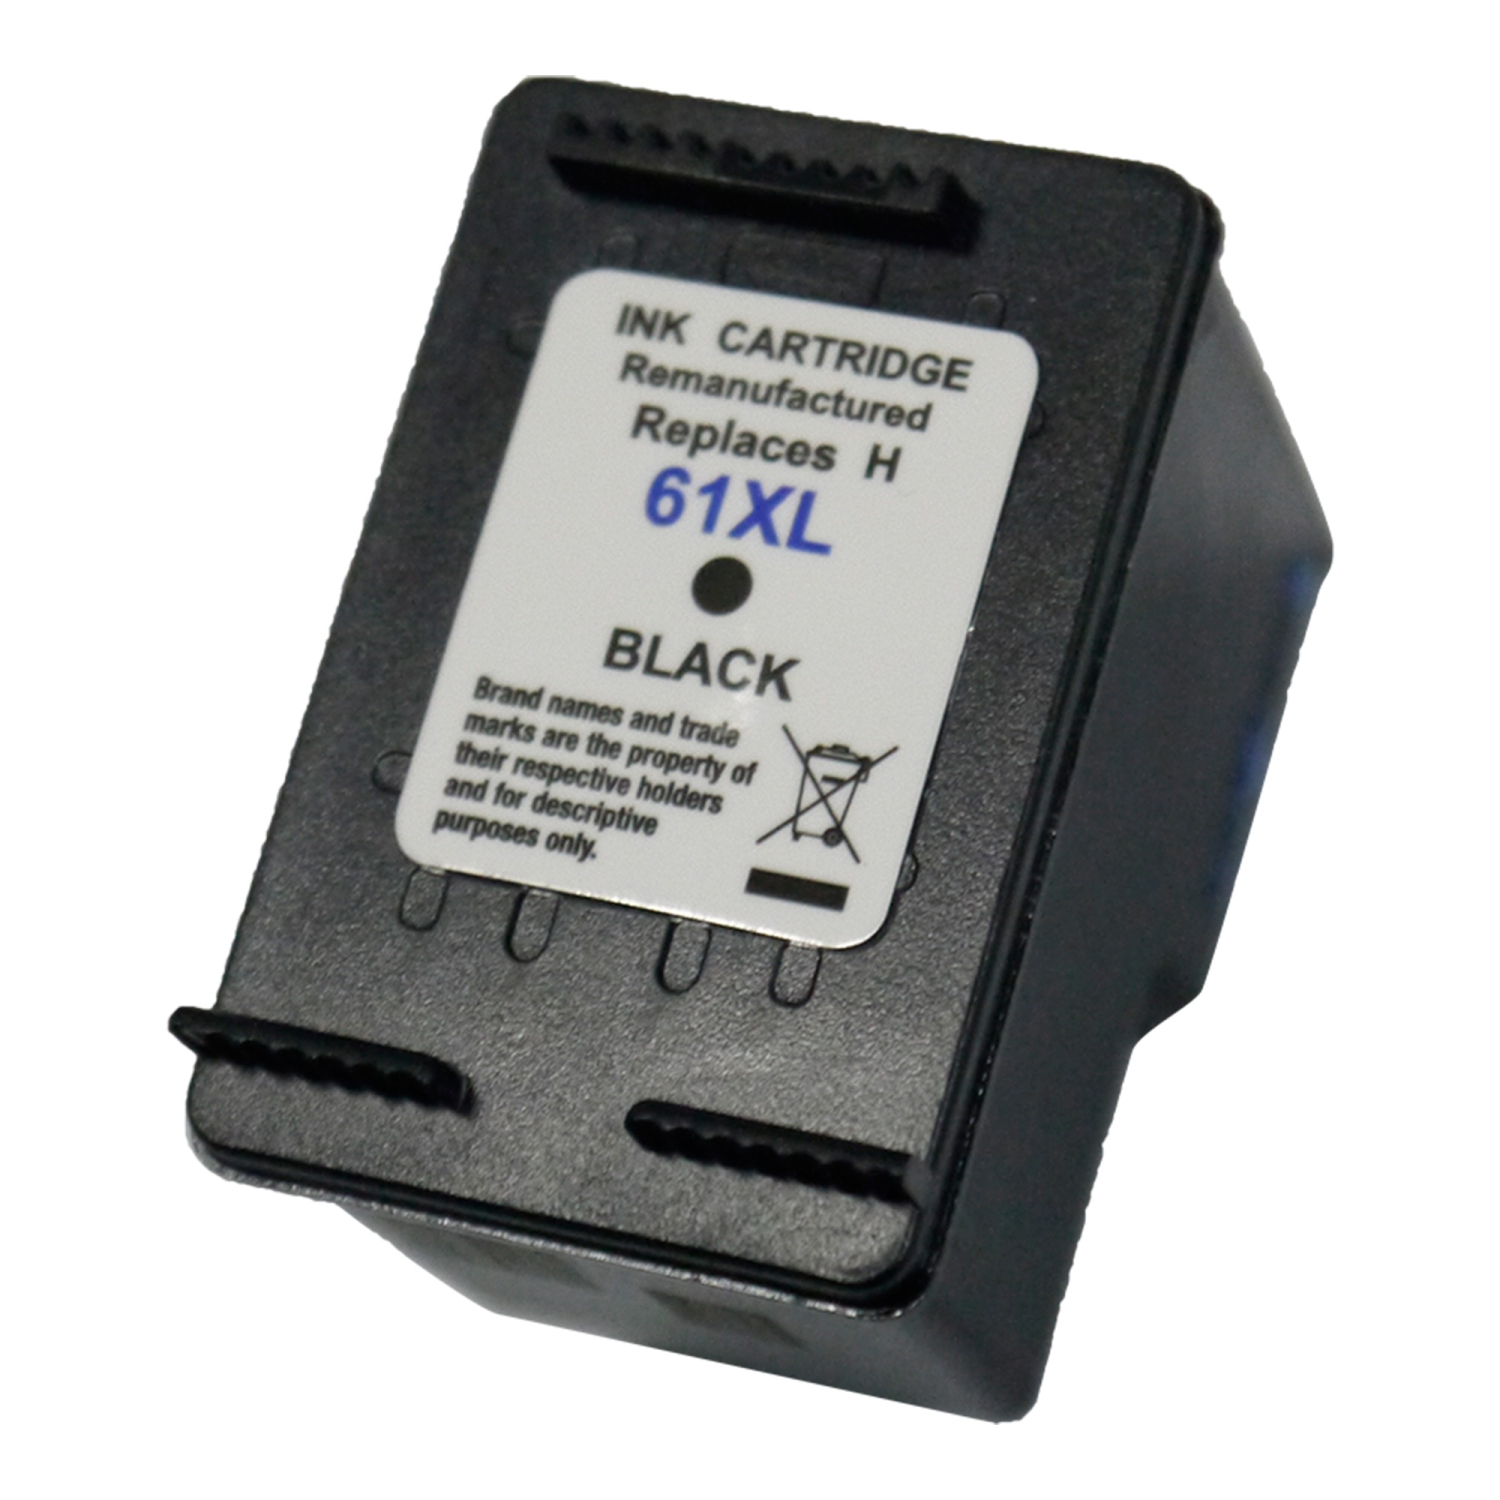 NEW SUPERIOR QUALITY! HP 61XL Black Compatible Ink Cartridge - FREE SHIPPING OVER $50!!